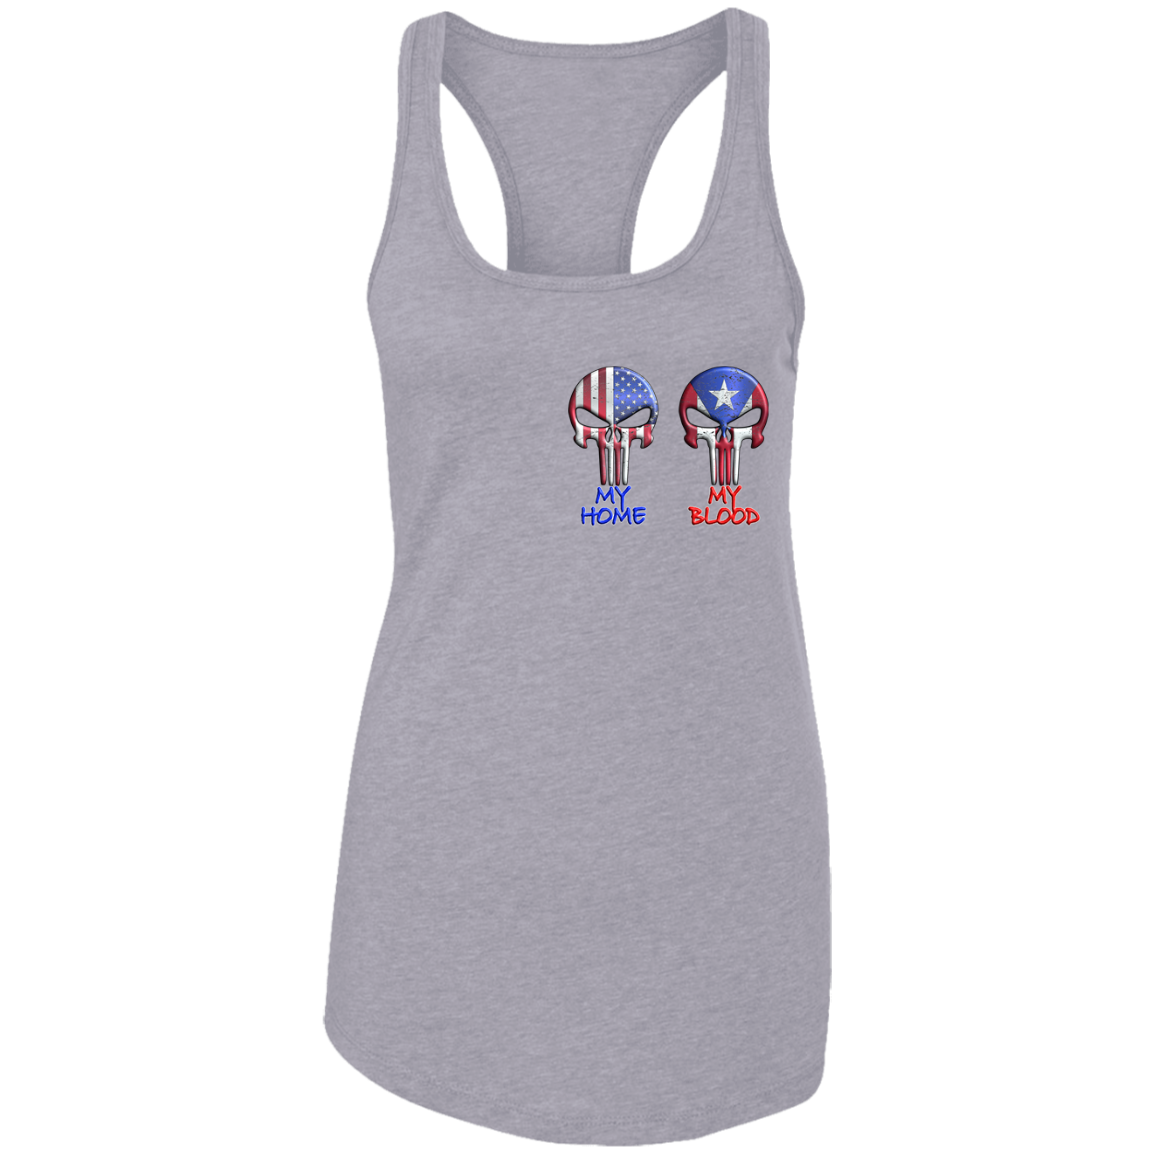 My Home My Blood Ladies Ideal Racerback Tank (Grey 2XL ONLY)